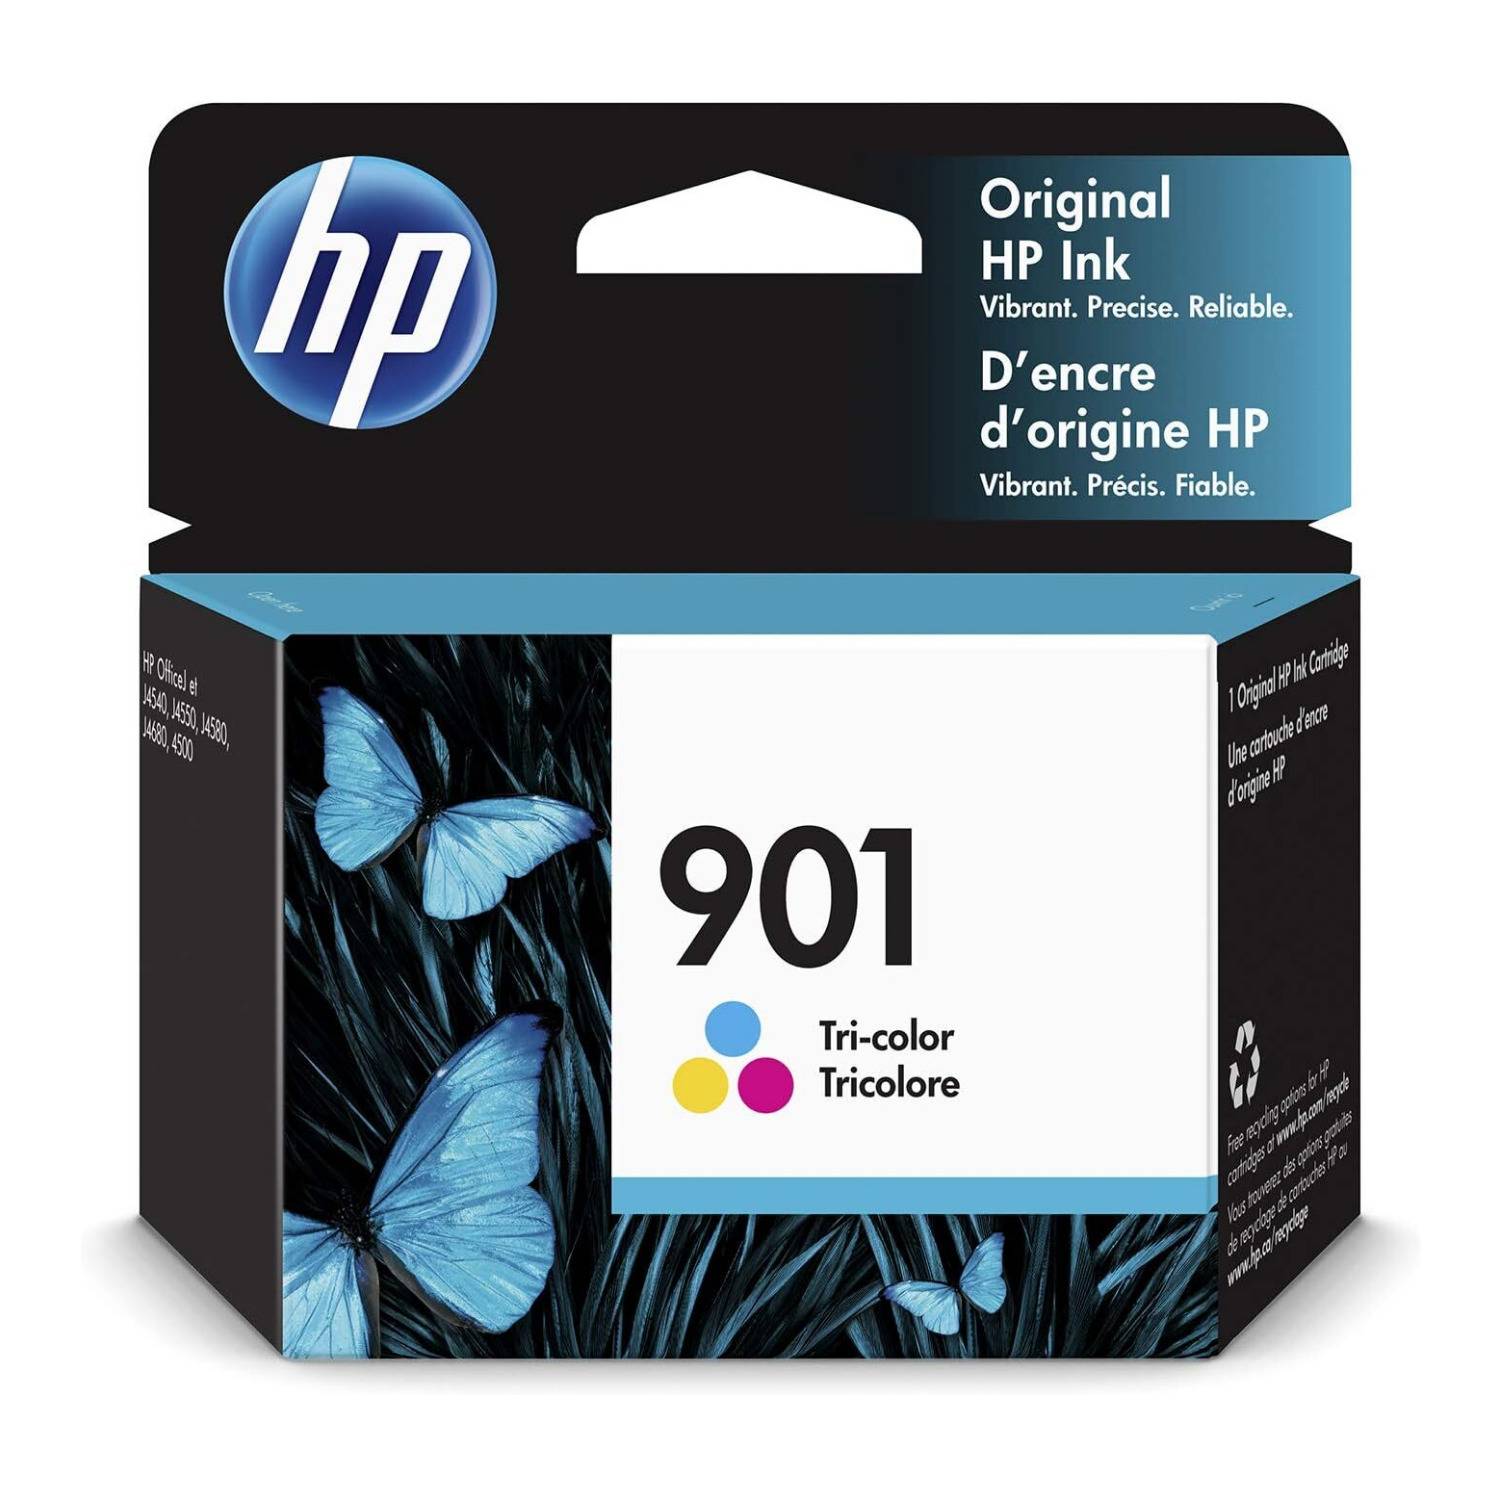 HP 901 Tri-color Original Standard Ink Cartridge Compatible with HP Officejet Printer (360 Pages)